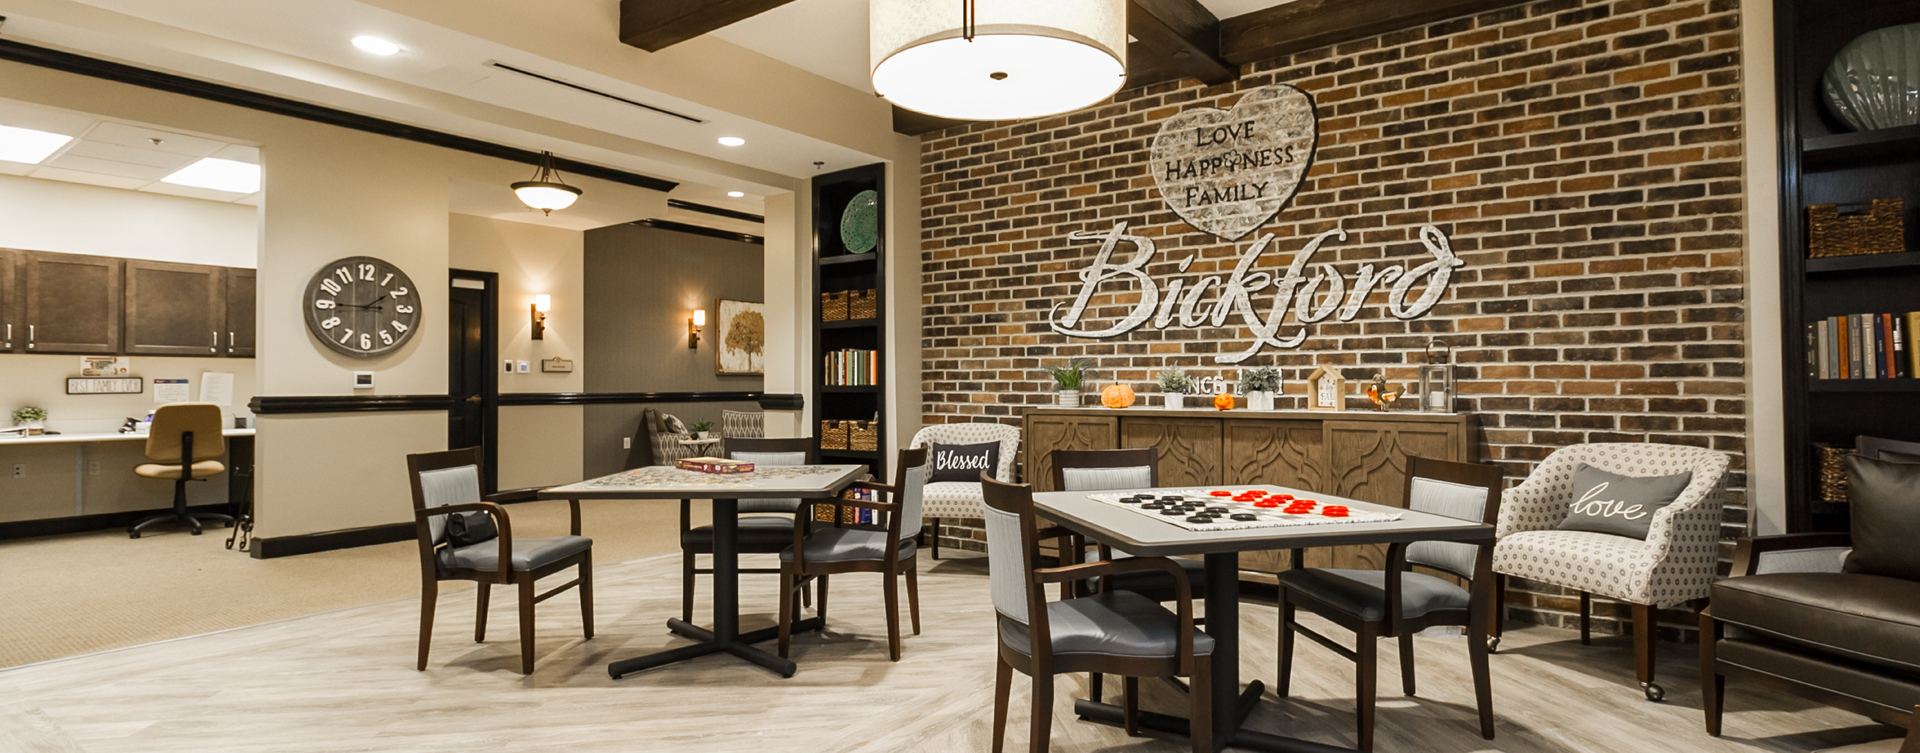 Enjoy a good card game with friends in the activity room at Bickford of Virginia Beach